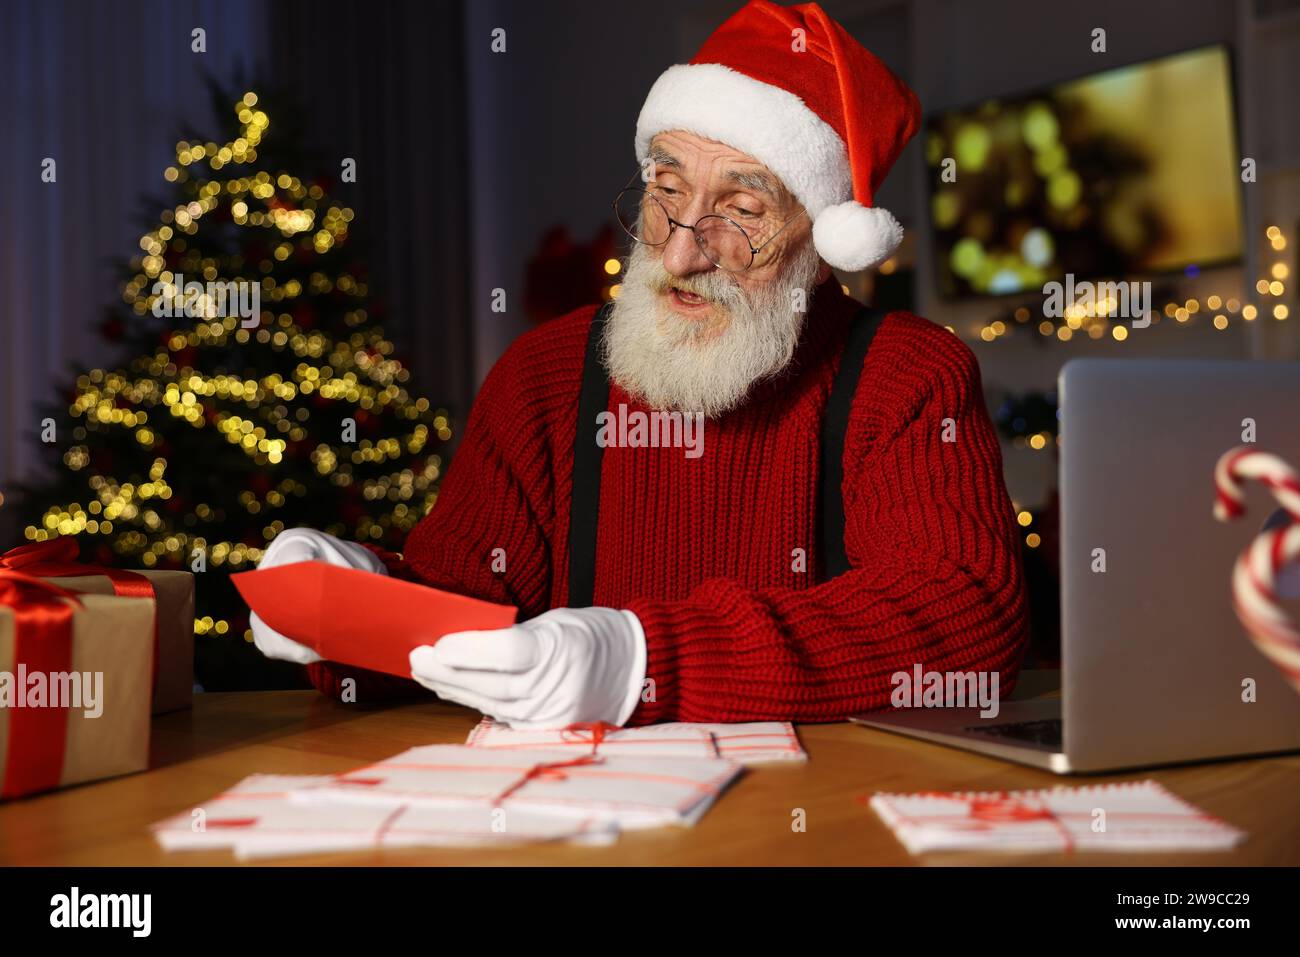 Santa Claus opening letter at his workplace in room decorated for Christmas Stock Photo